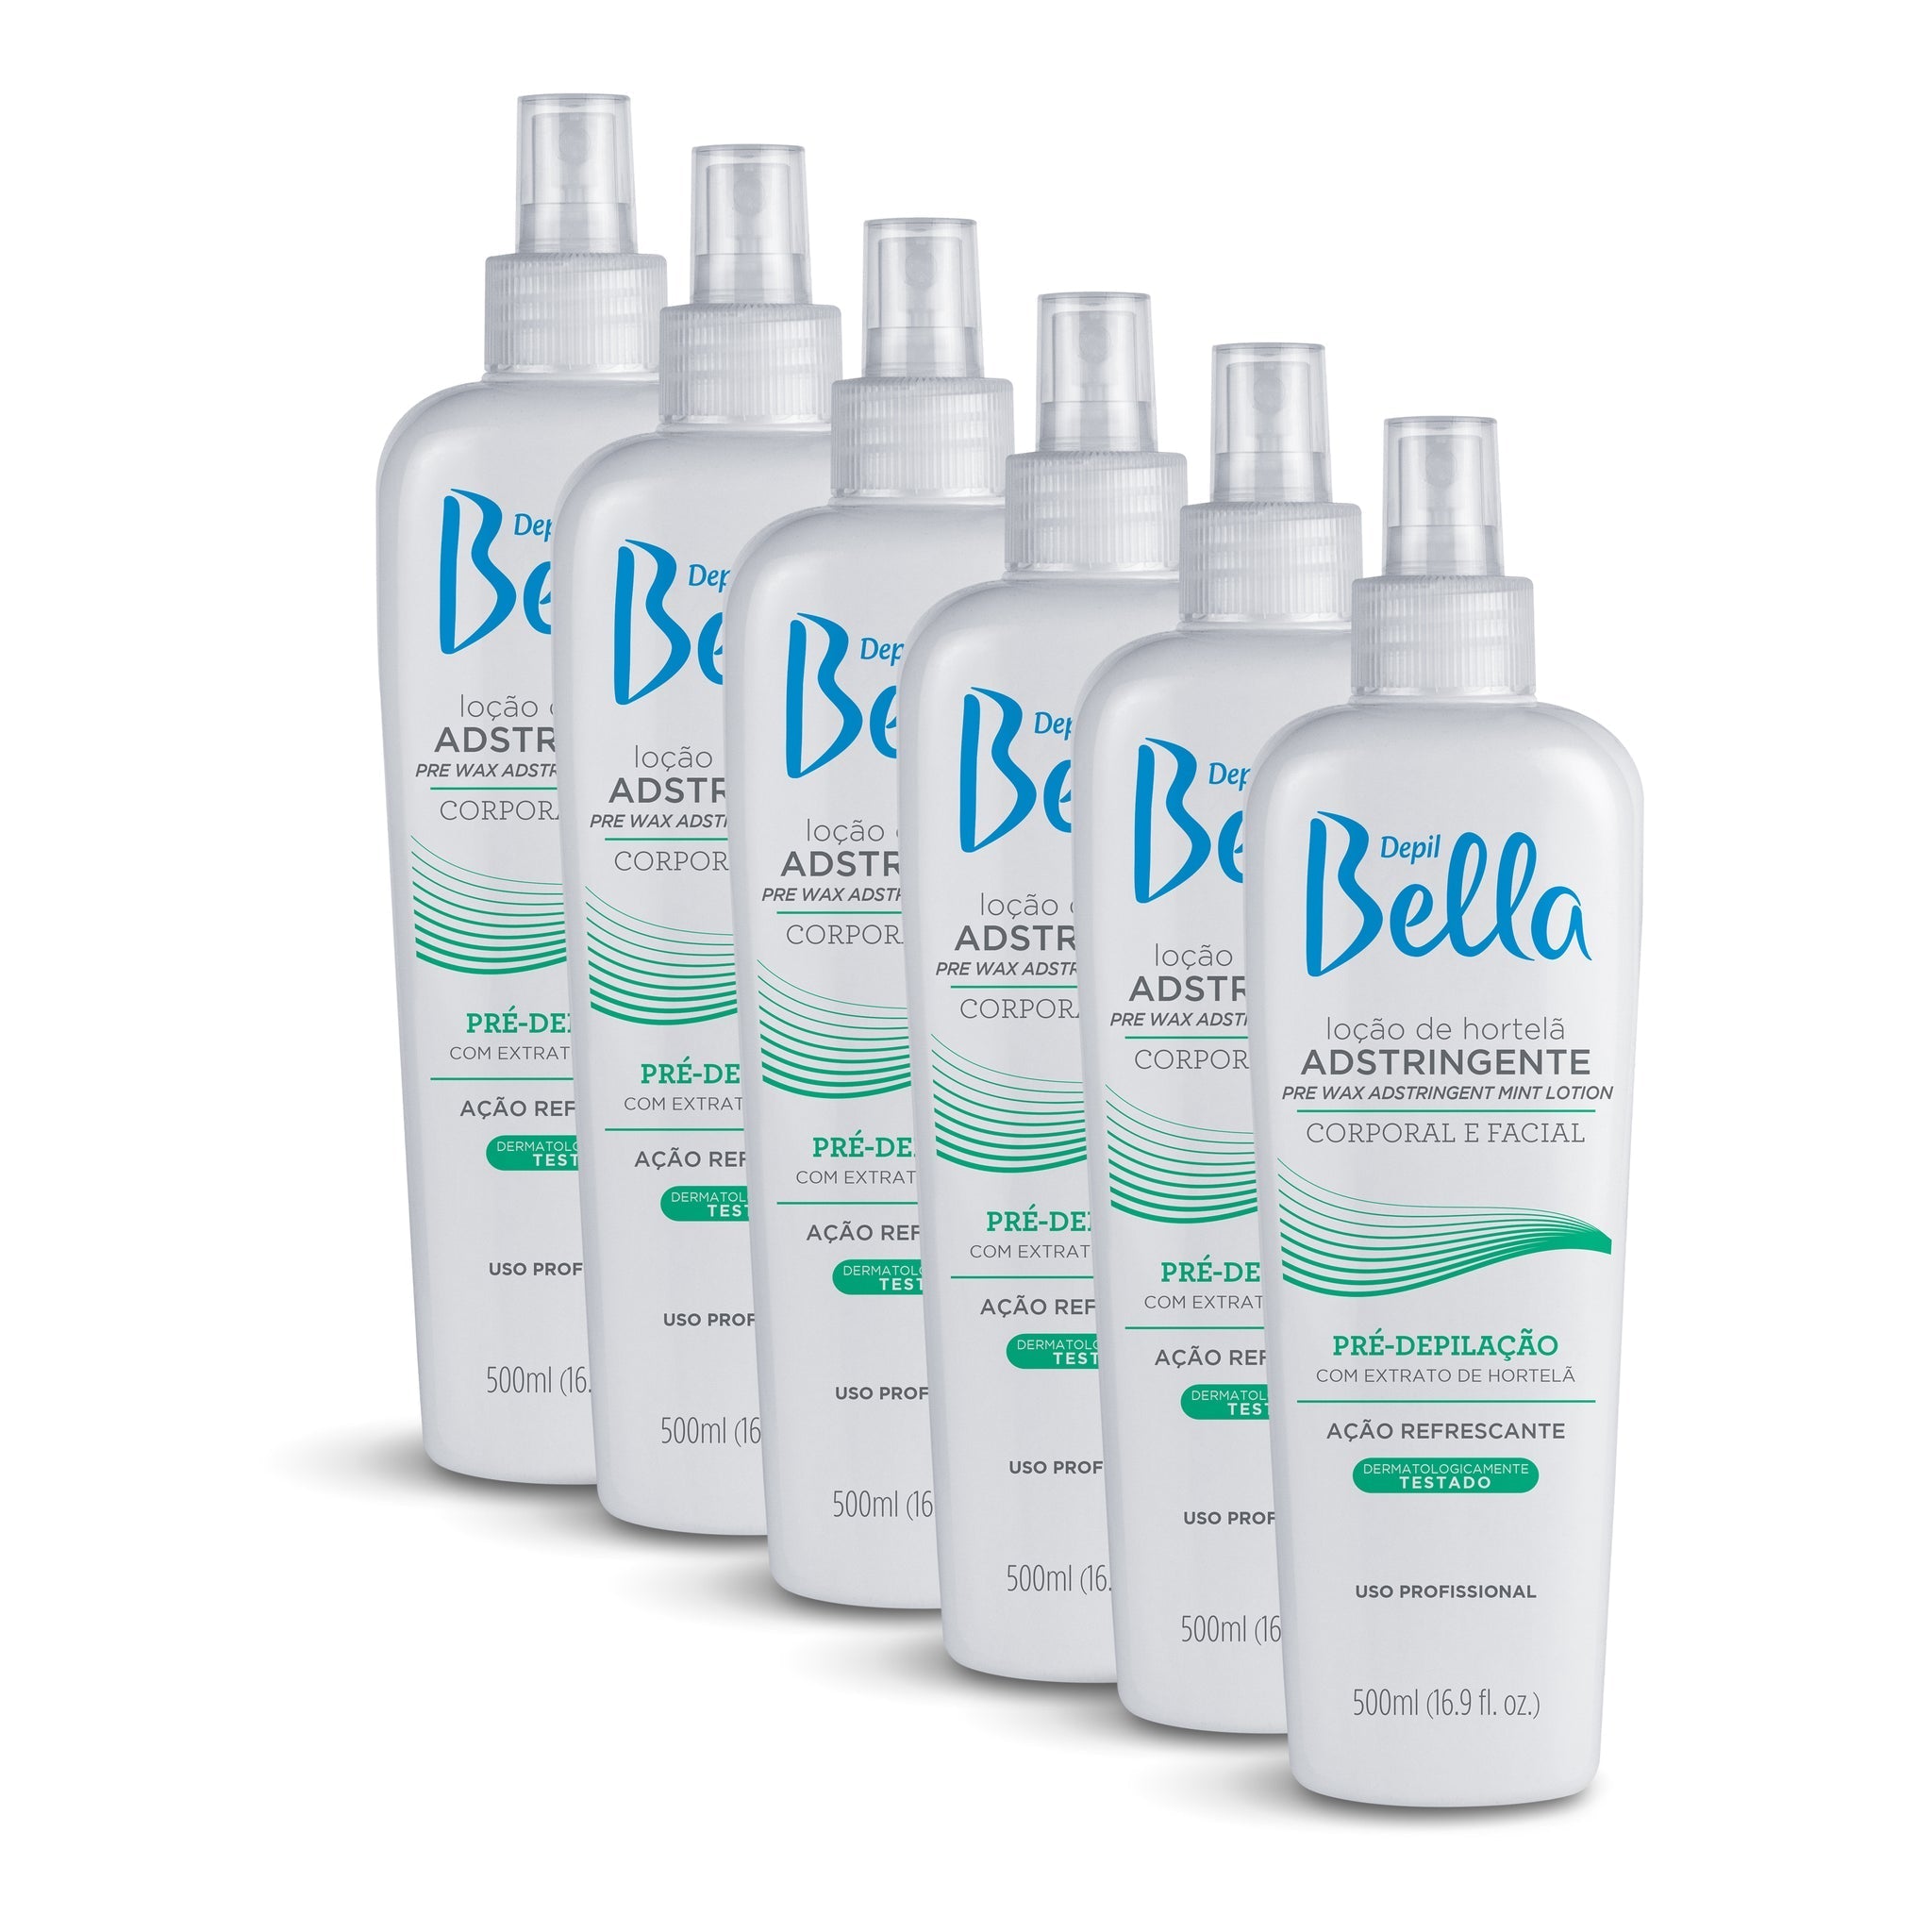 Depil Bella Skin Lotion Depil Bella Pre Waxing Astringent Skin Lotion with Mint Extract 500ml (6 Units )